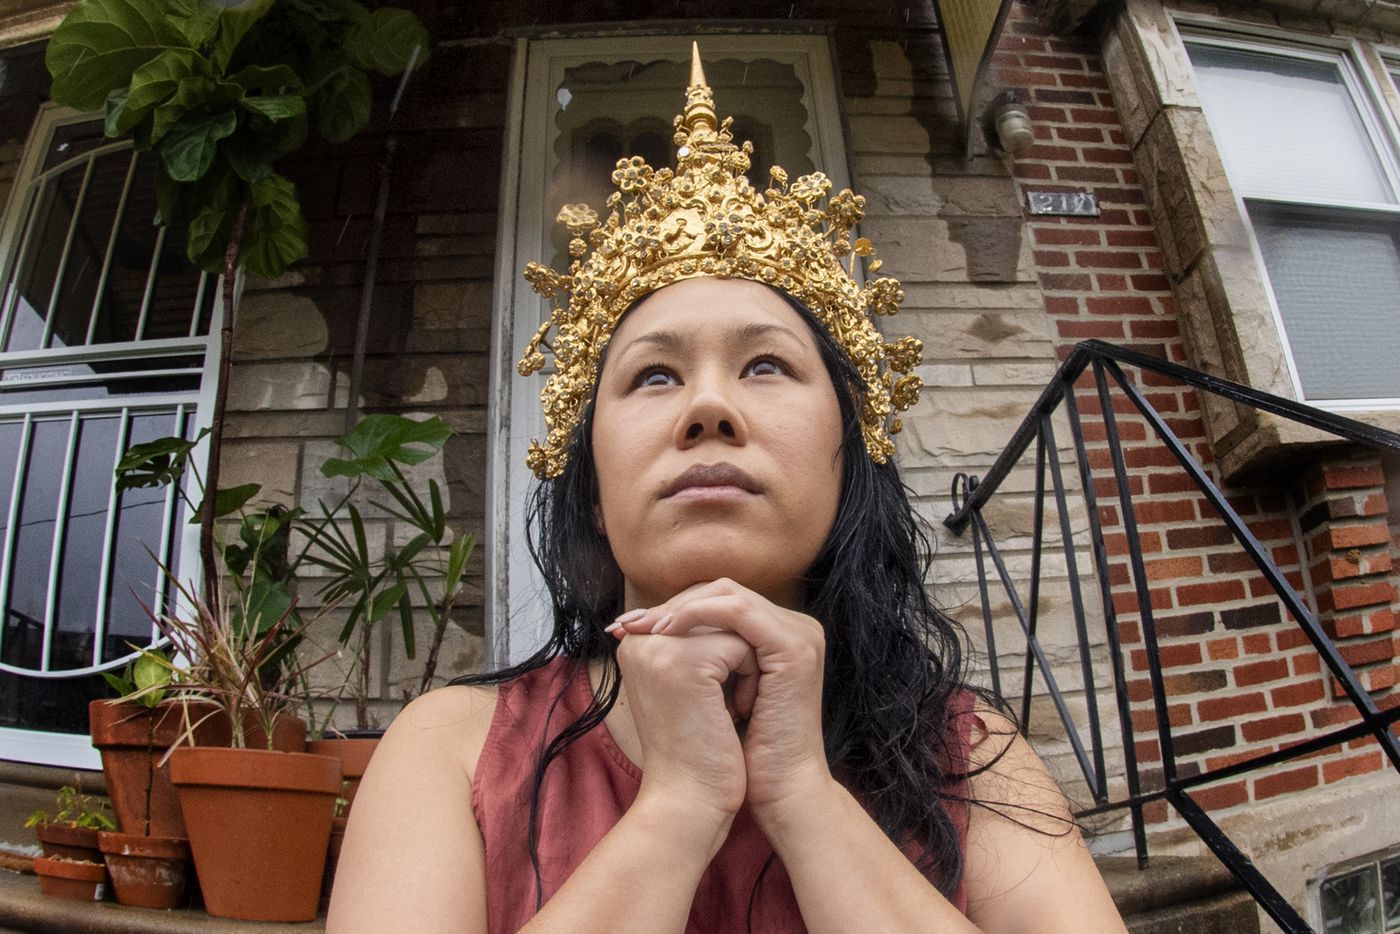 Catzie Vilayphonh is photographed wearing Laos folk crown near her home in Philadelphia, Pa. Friday, May 22, 2020. Vilayphonh, is a poet who runs the community arts group Laos in the House. Image by Jose F. Moreno / The Philadelphia Inquirer. United States, 2020.